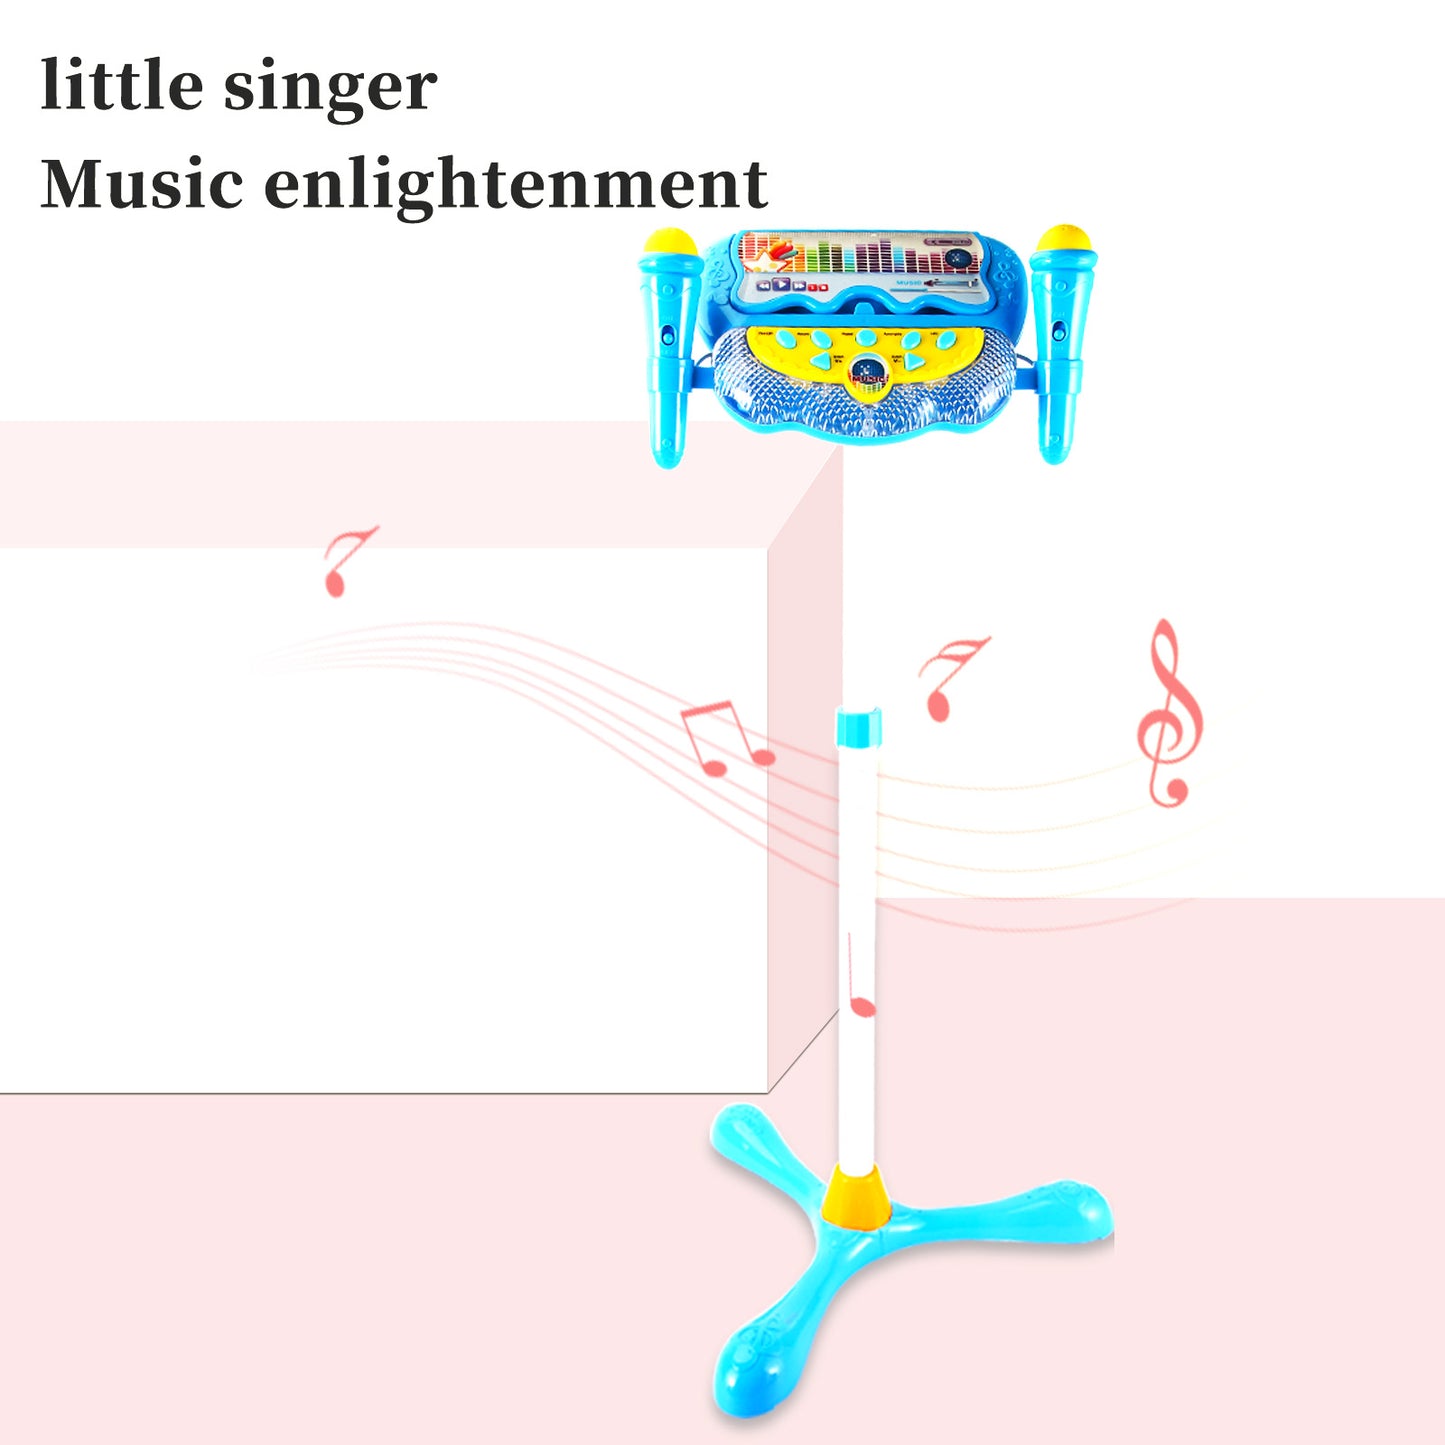 AOQIMITENJOY Musical Instrument Electronic Vertical Microphone Toys with Panel 2 Handheld Microphone LED Lighting Children's Toys Birthday Gifts for Boys and Girls 3 Year Old+ HK-6018